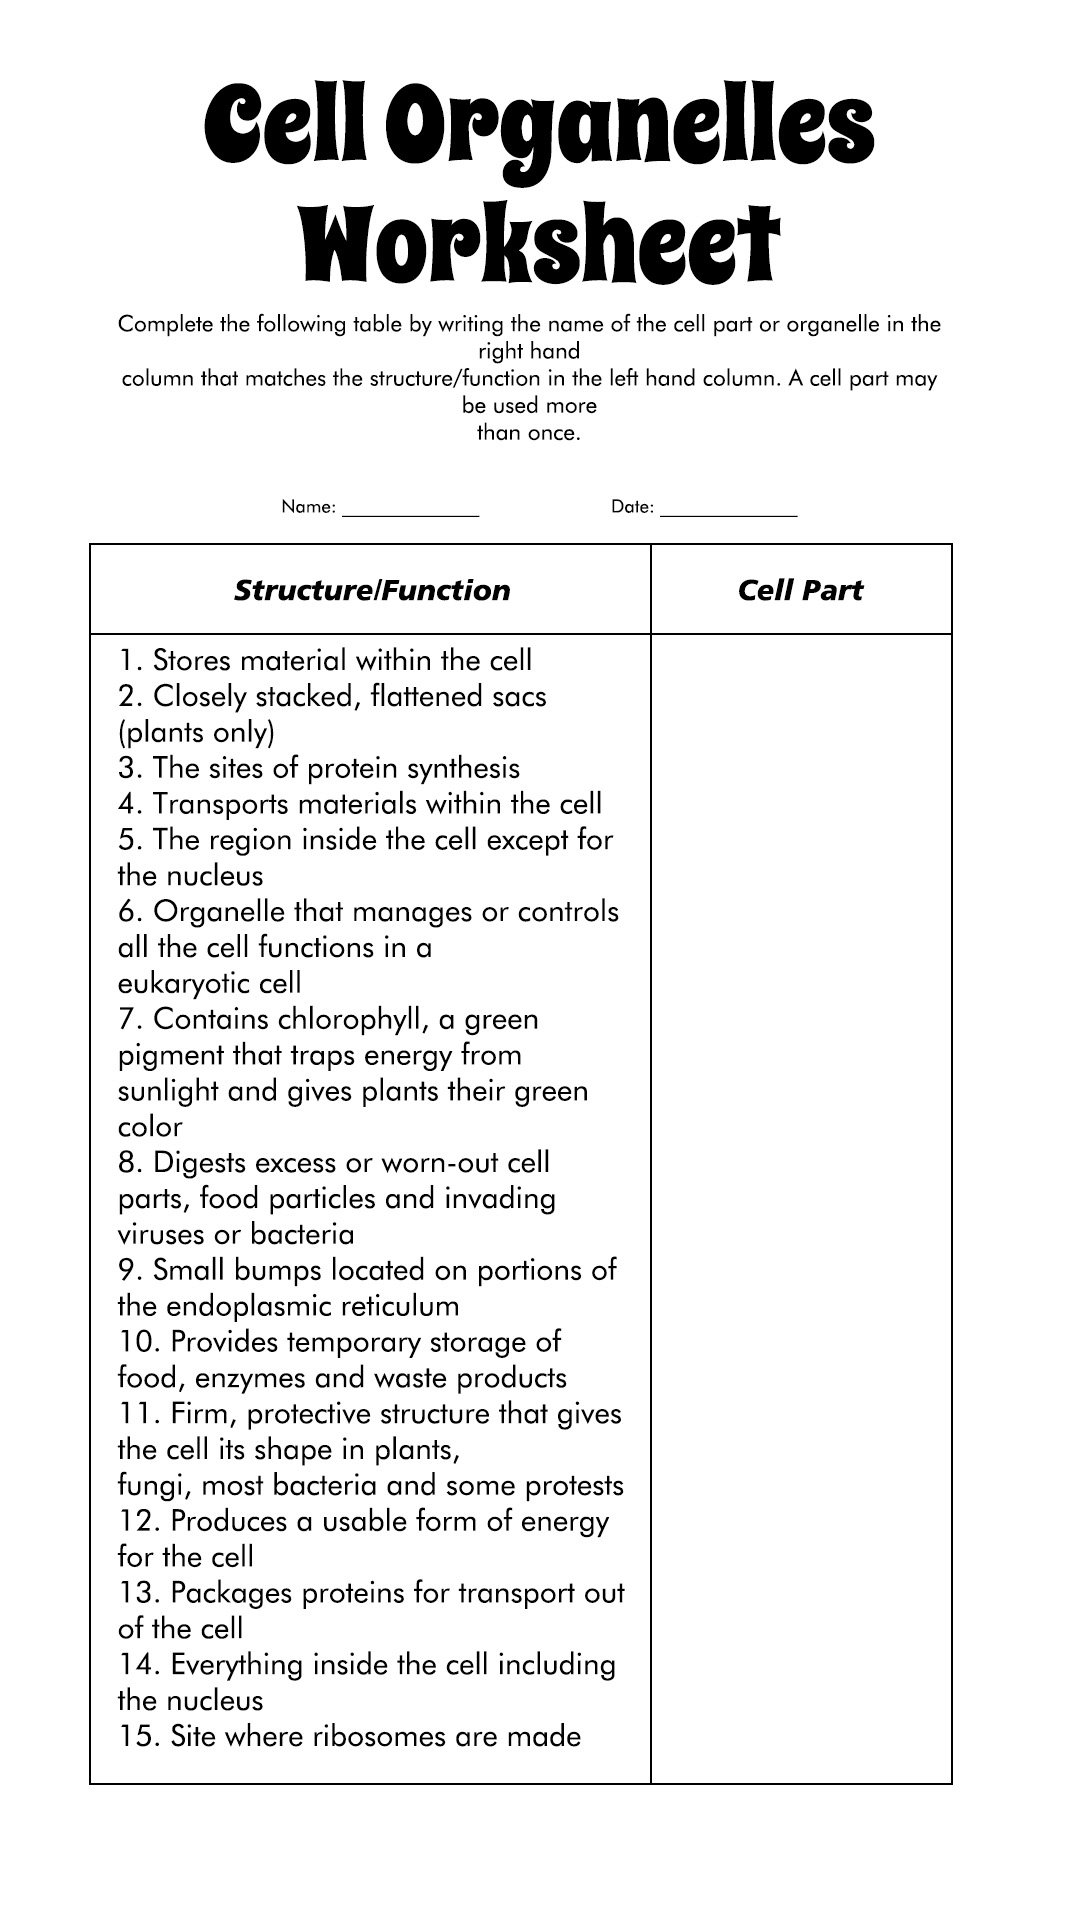 Cell Organelles and Functions Worksheet Image